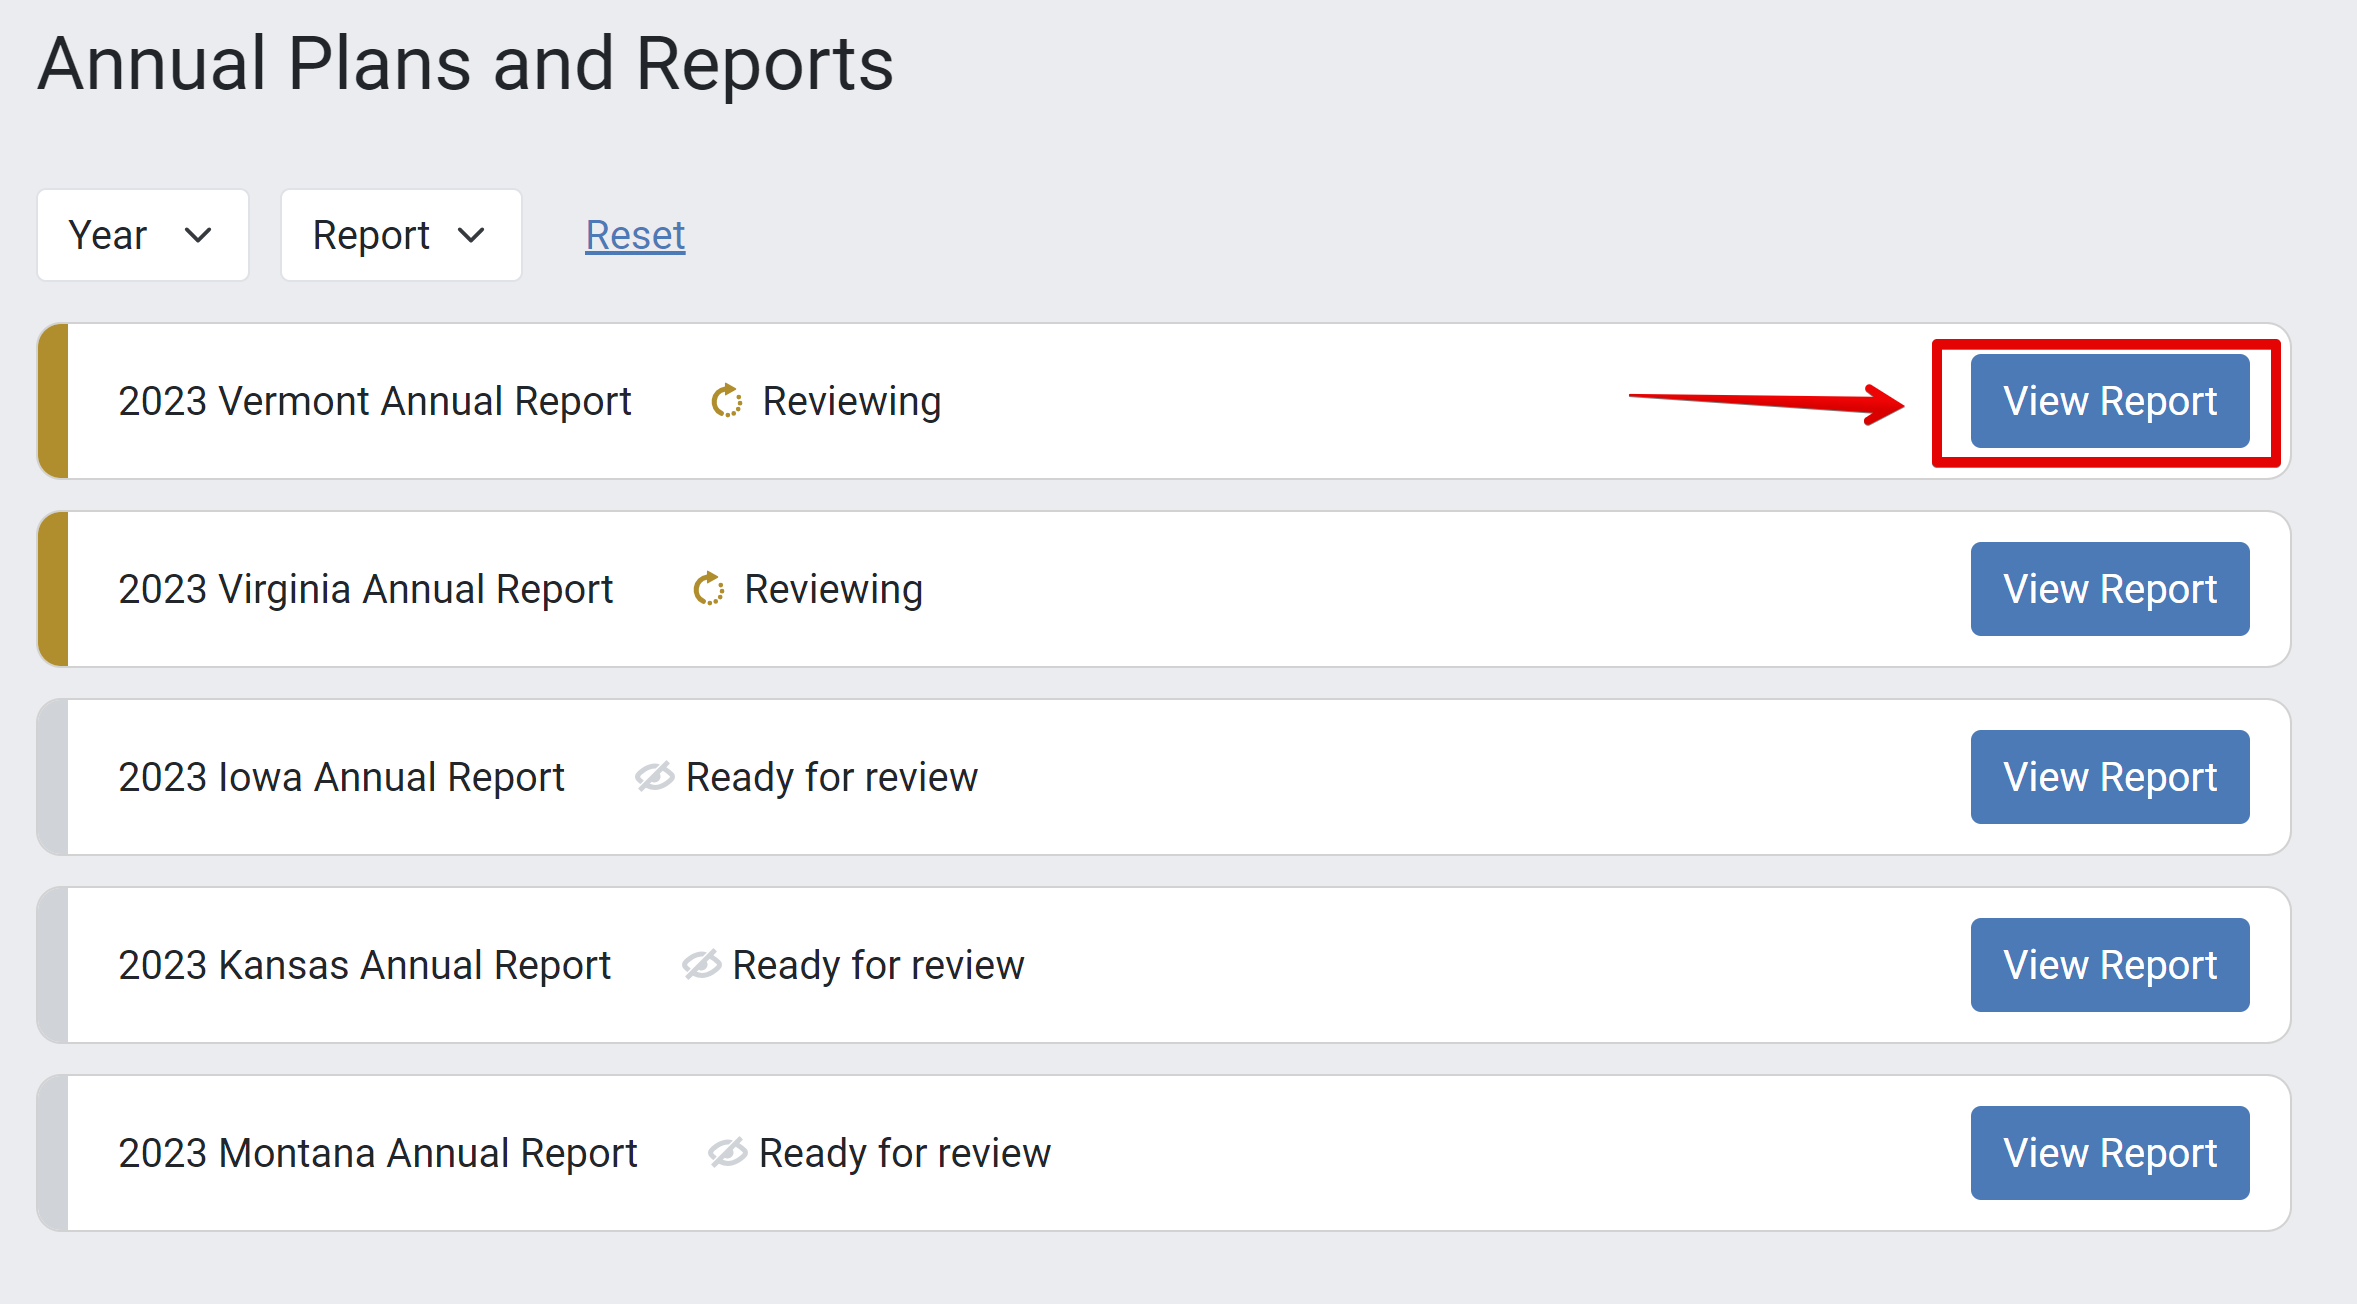 view report button